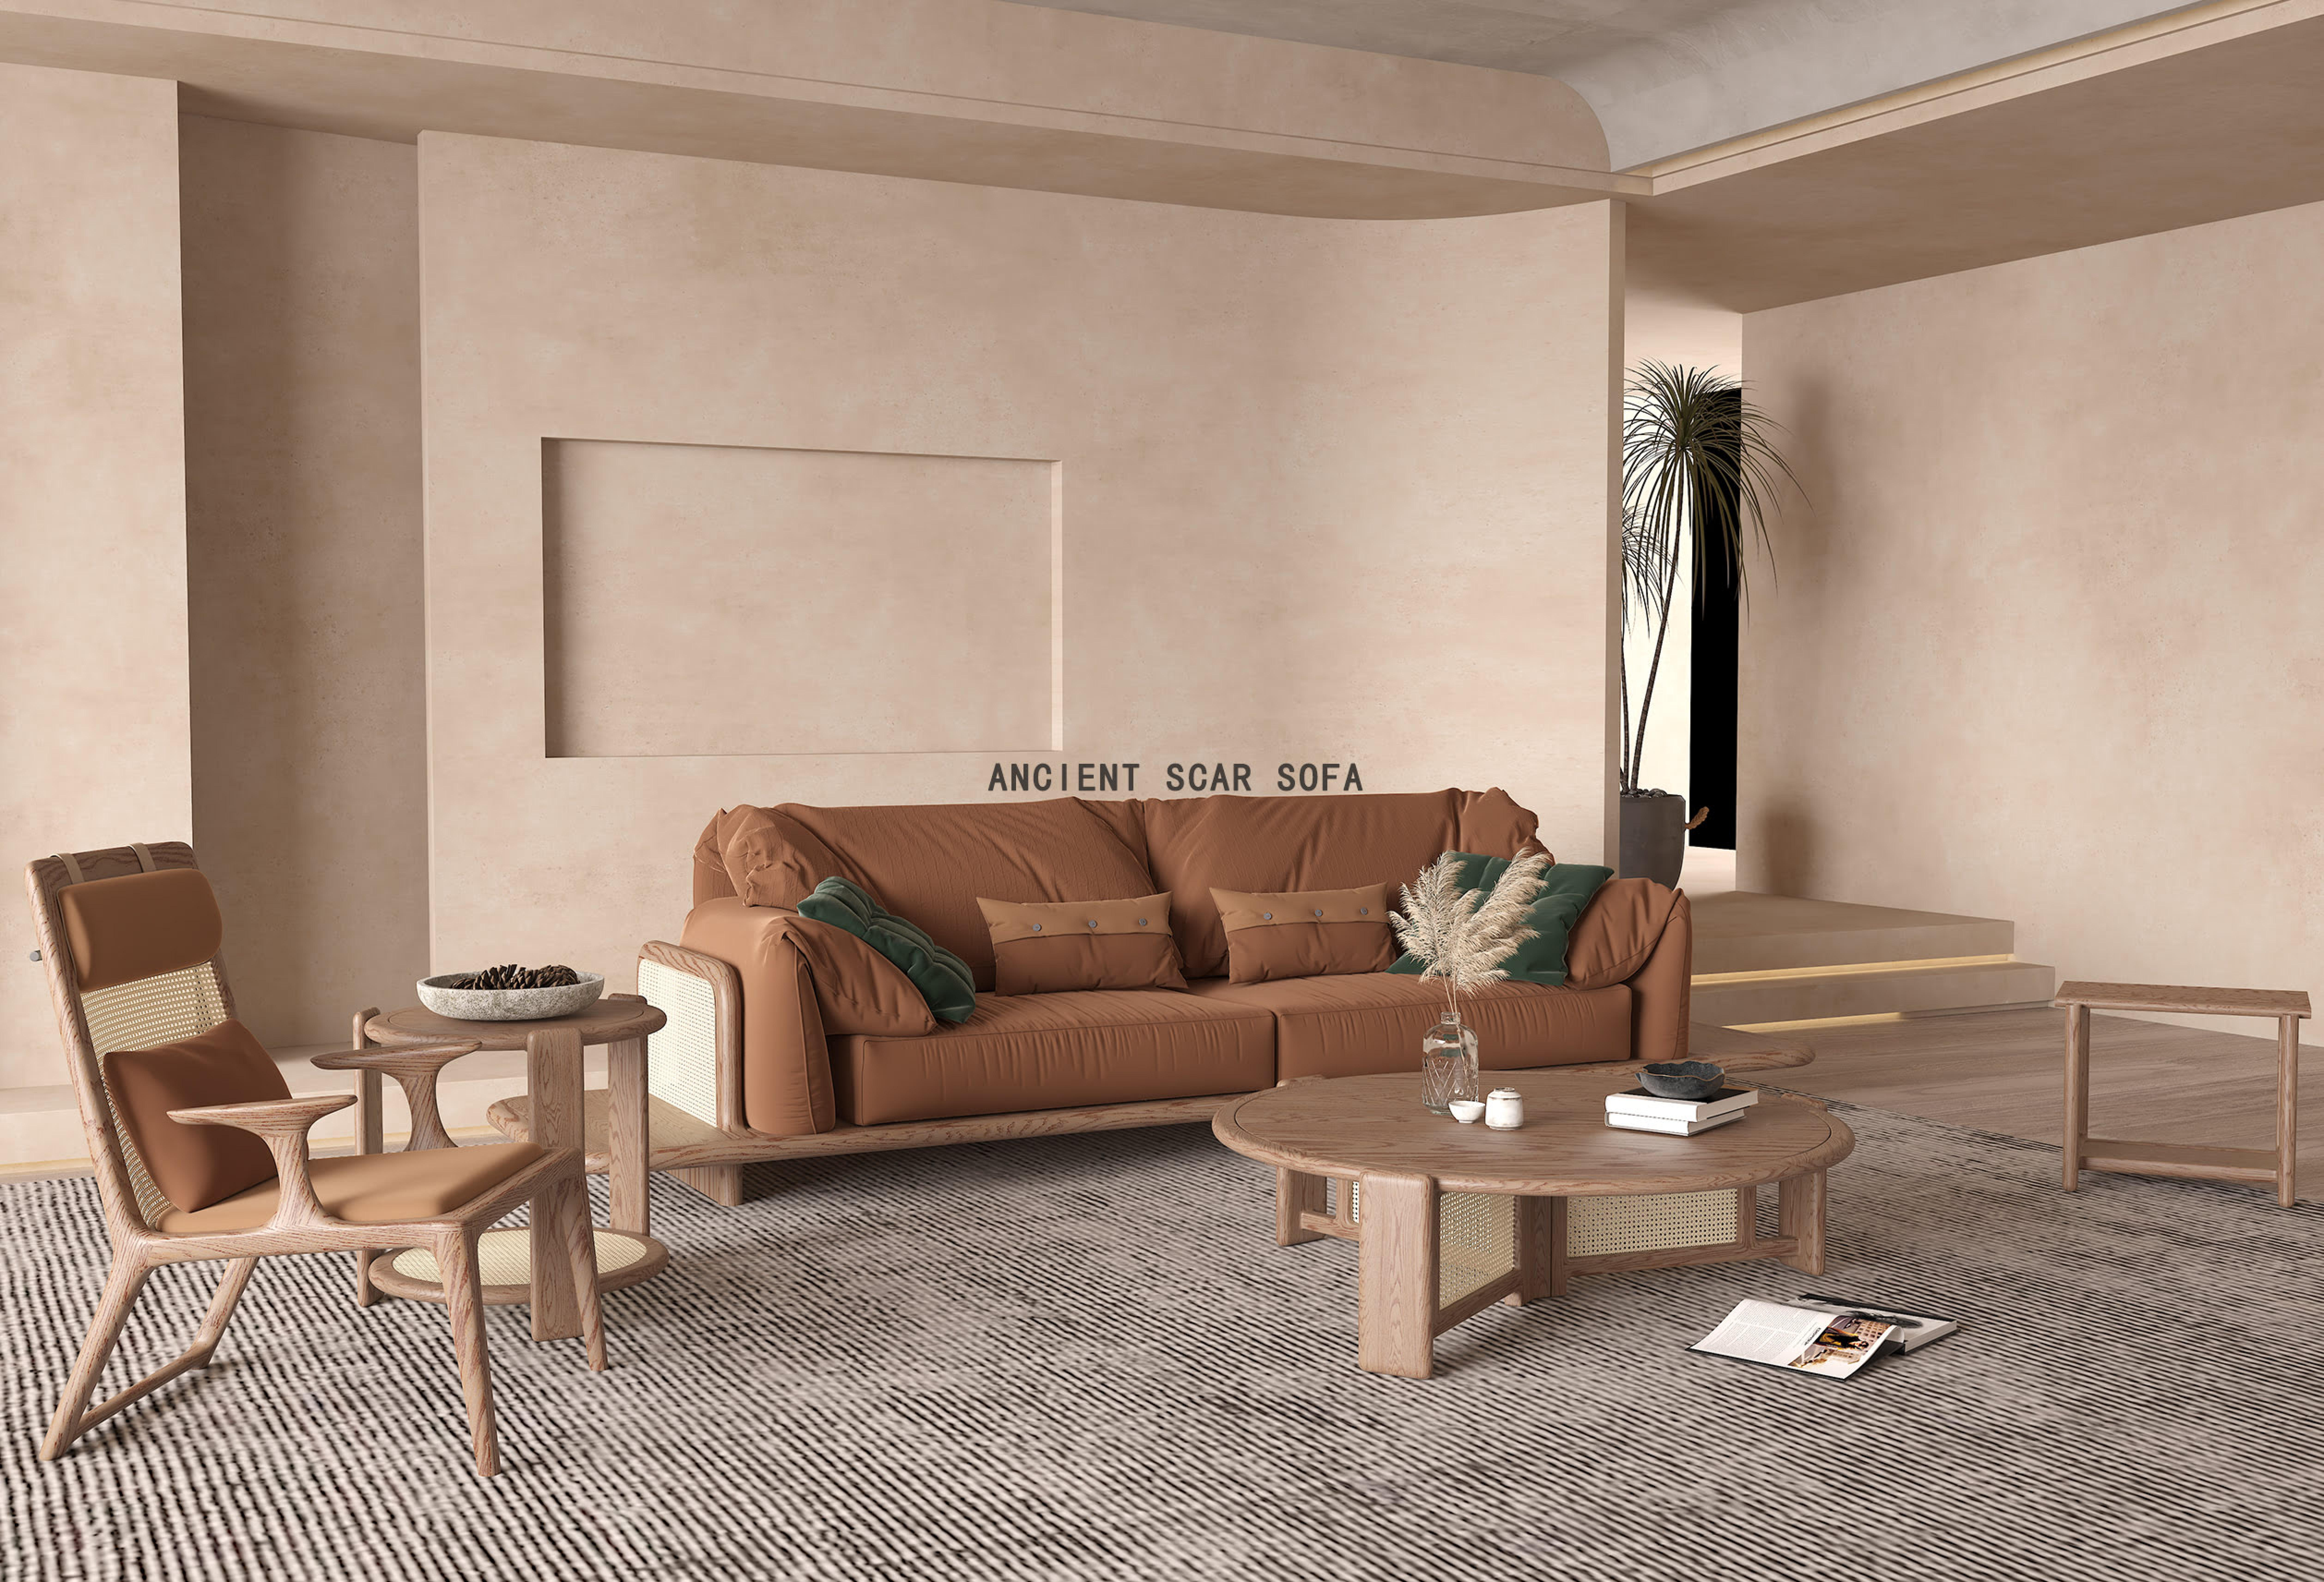 TBG-S03 three seat plaform sofa couch with extend coffee table Couch & Sofa: Find Comfortable Seating Options for Your Living Space sofa,couch,nordic furniture,modern wooden sofa,living furniture \,2023 new luxury modern furniture design,three seat fabric couch